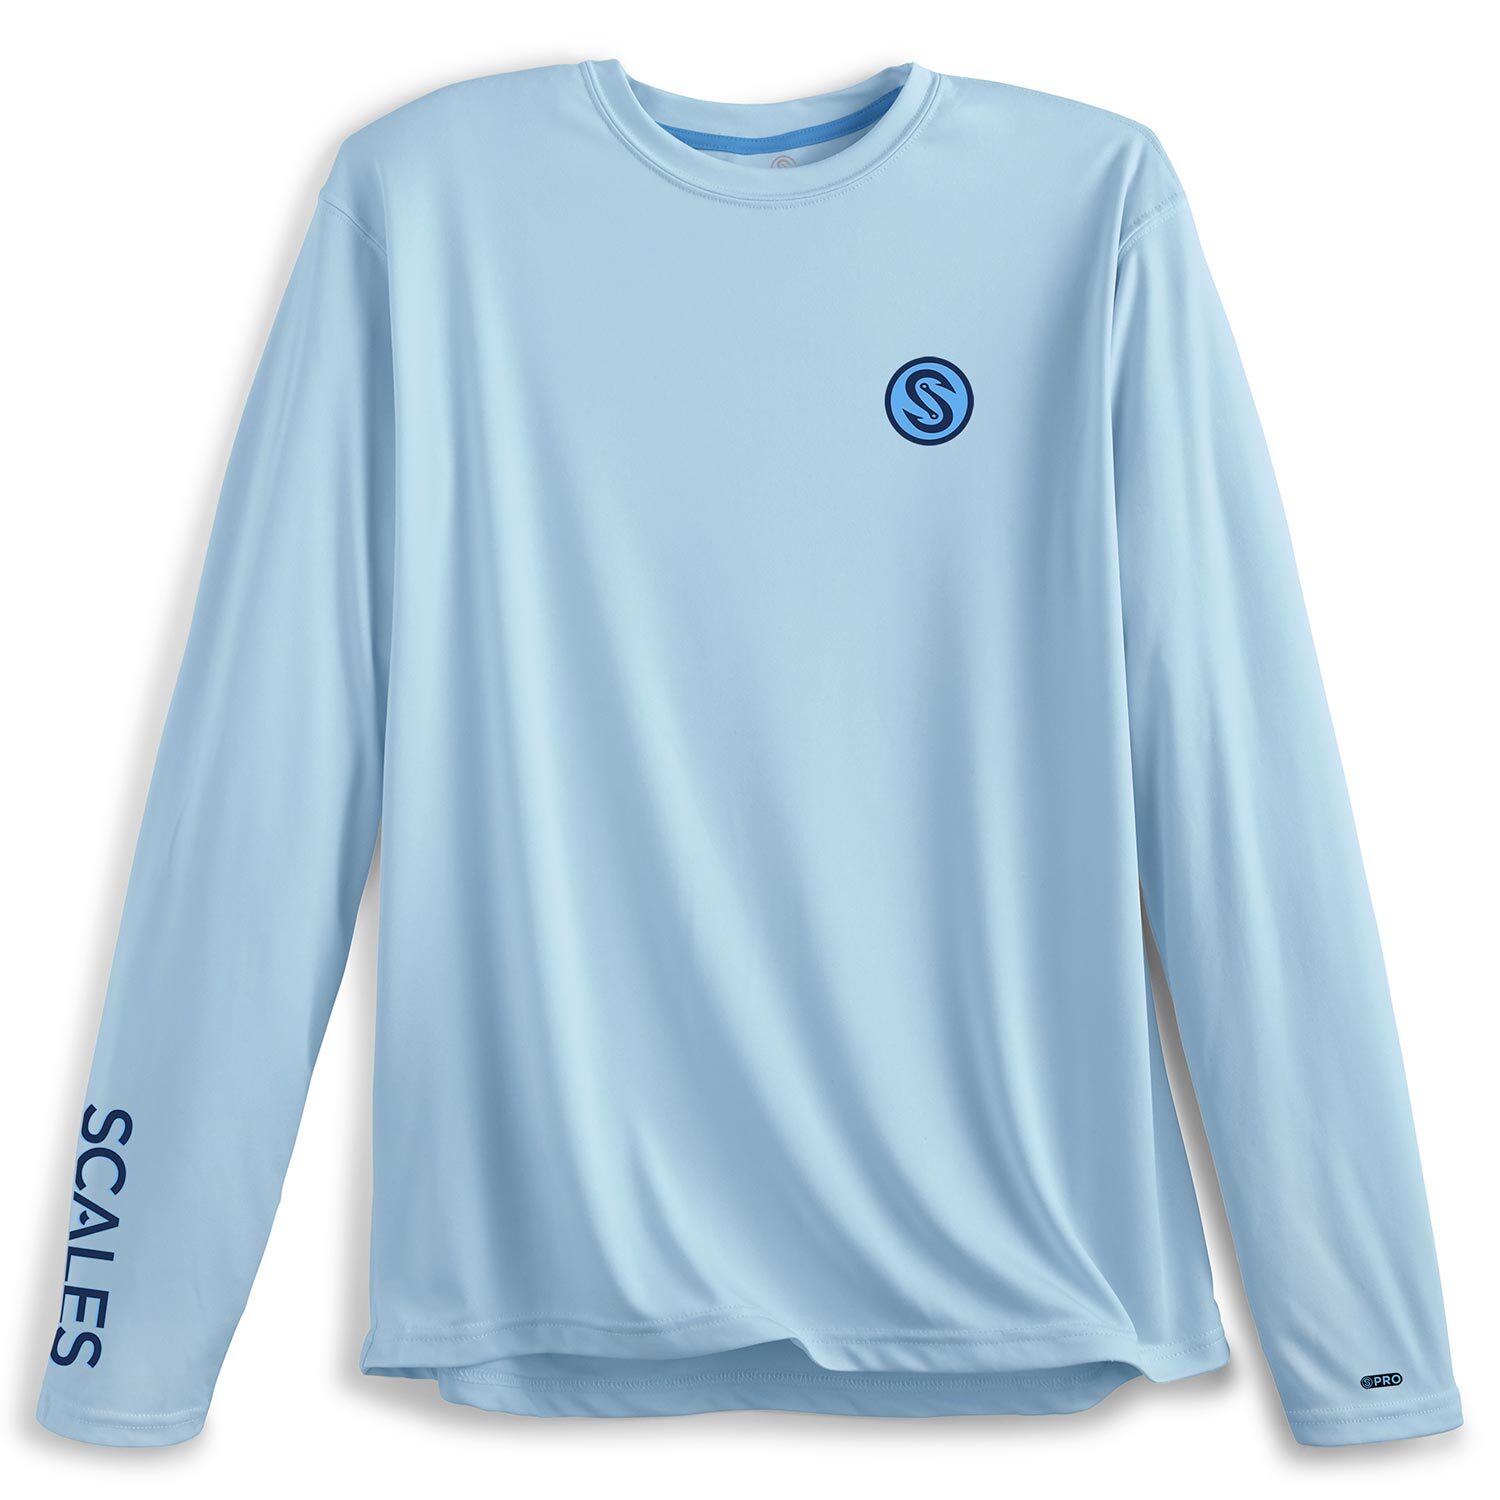 SCALES Men's Team Scales Pro Performance Shirt